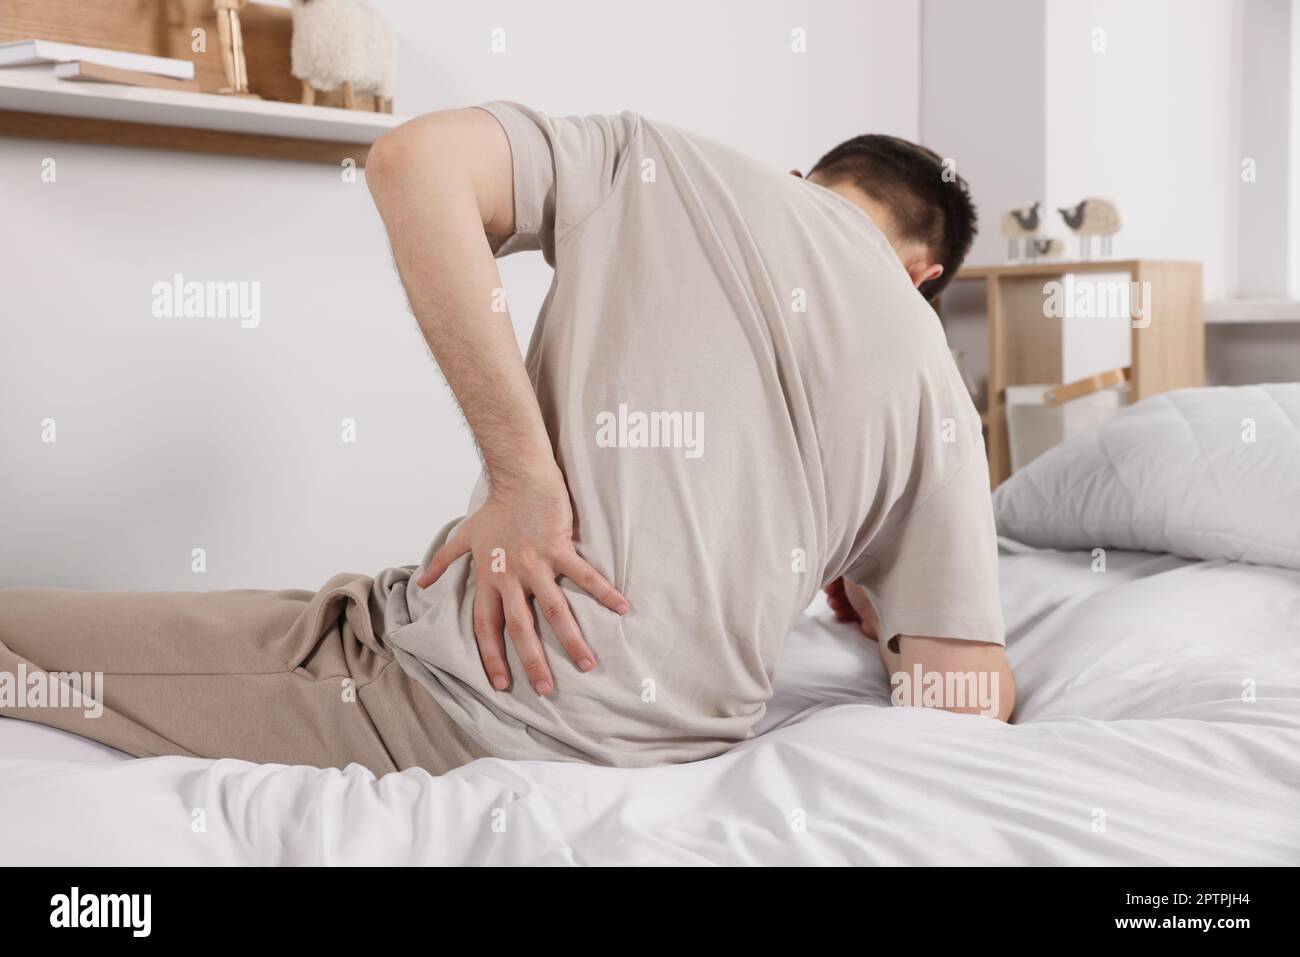 Man suffering from back pain while sitting on bed in room. Symptom of scoliosis Stock Photo